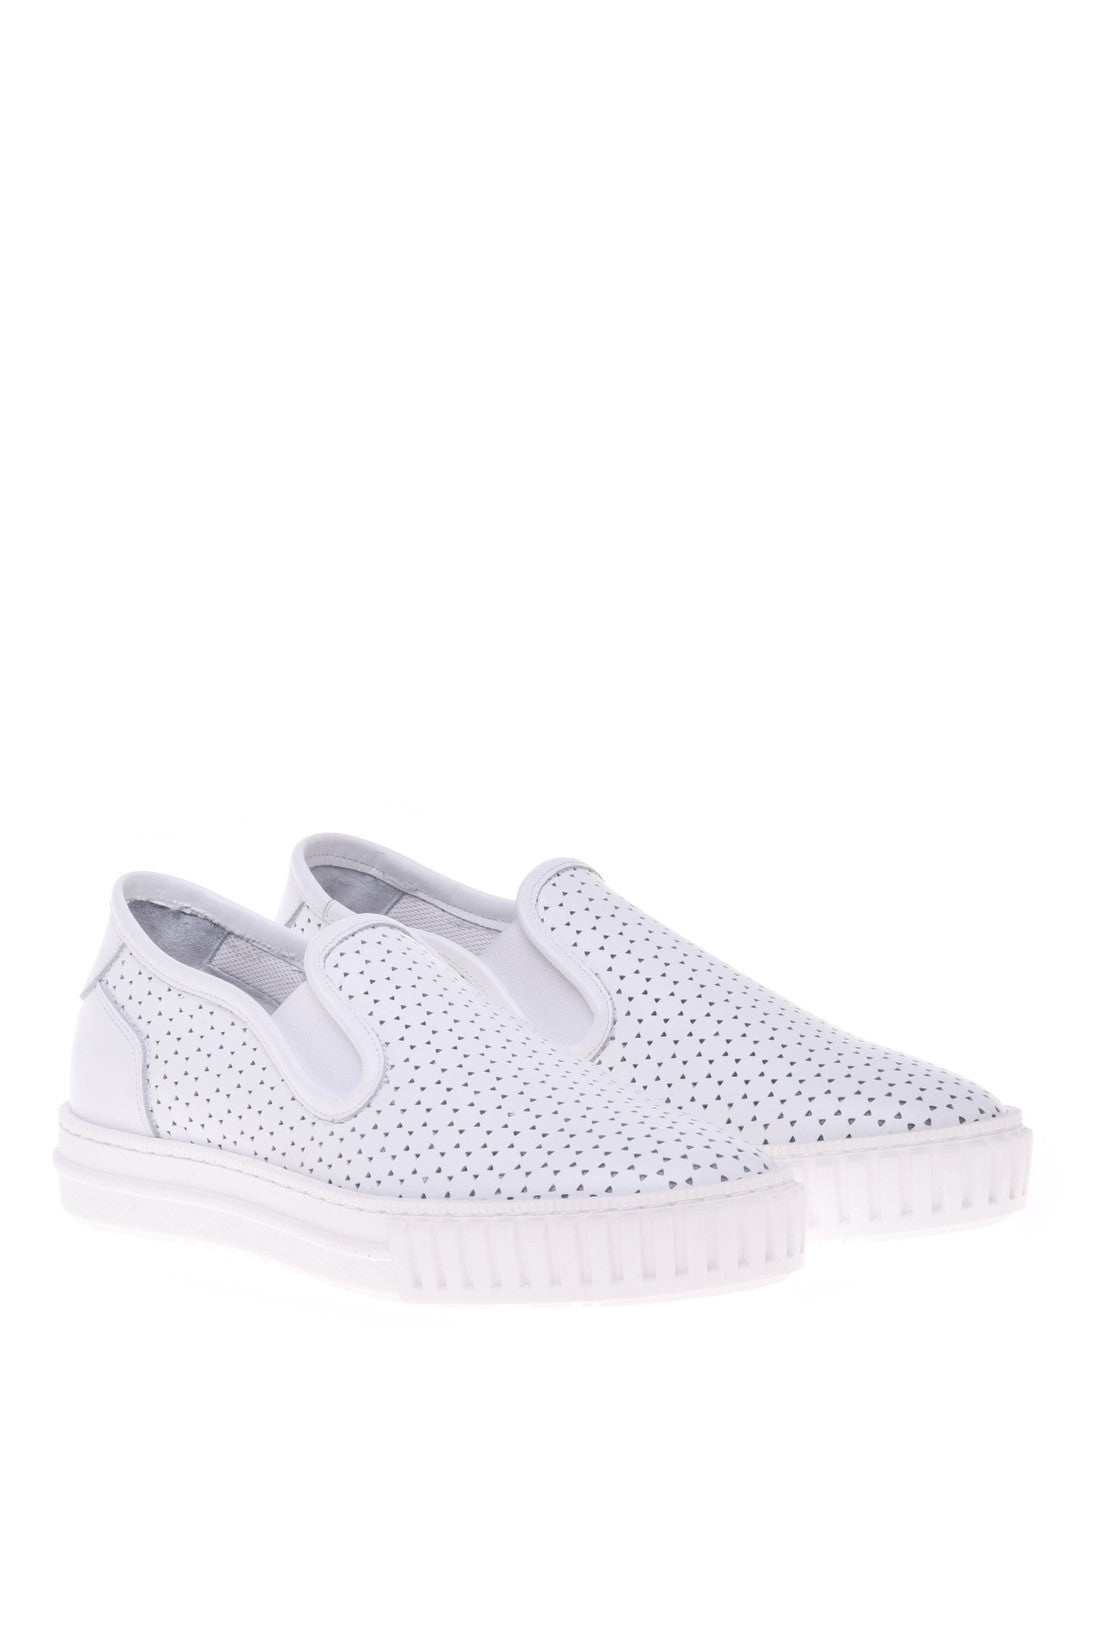 Loafer in white perforated leather